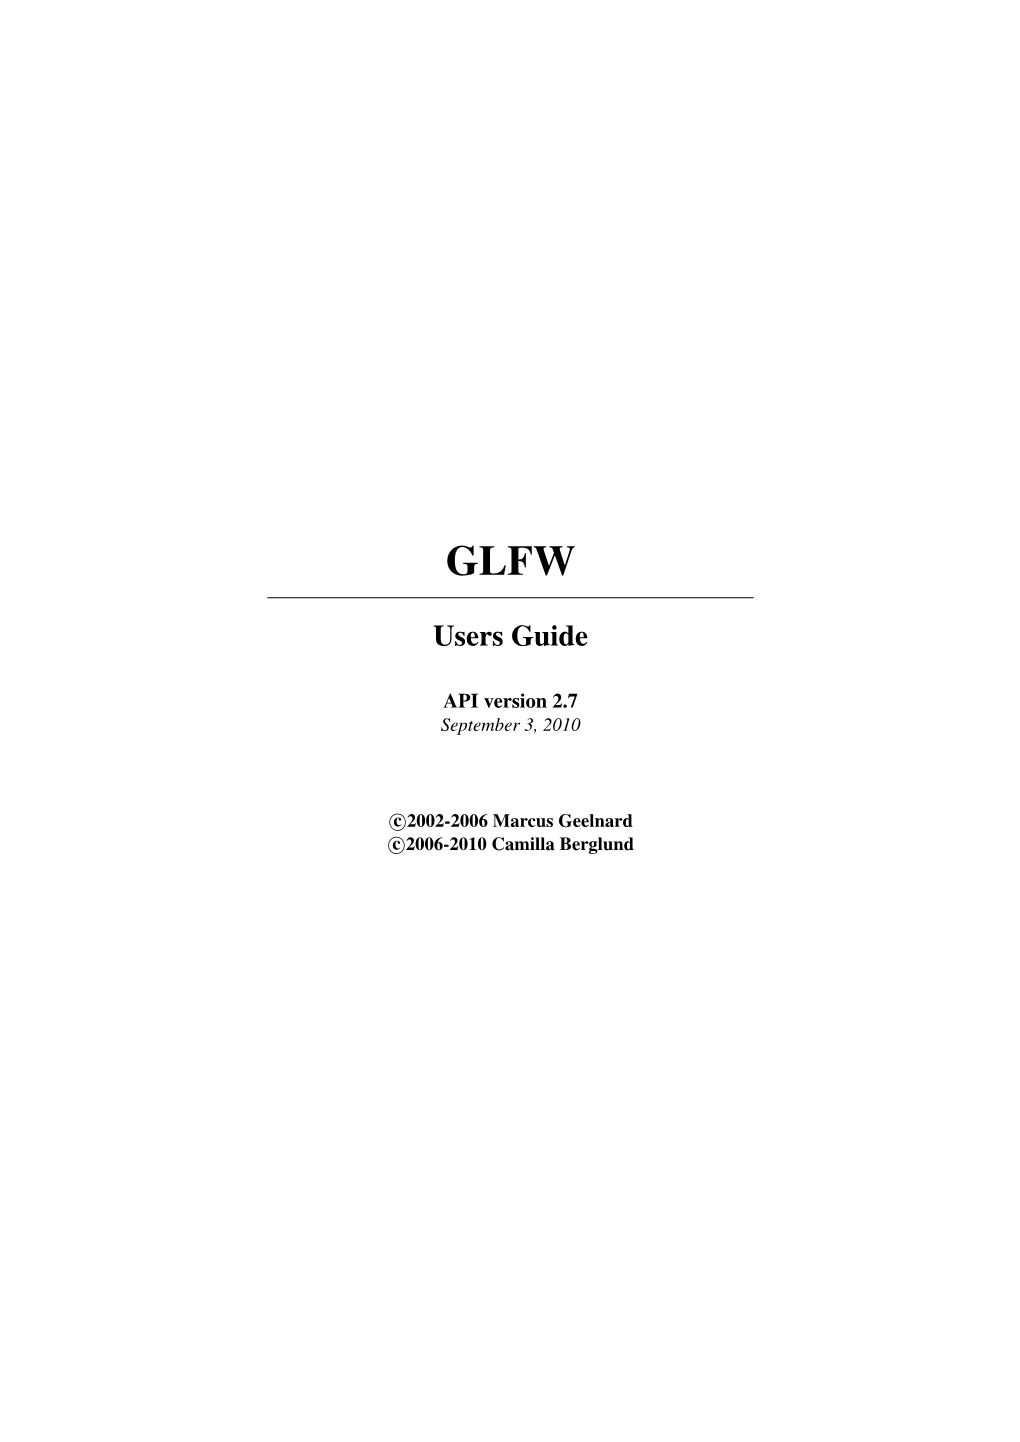 GLFW Users Guide API Version 2.7 Page 1/39